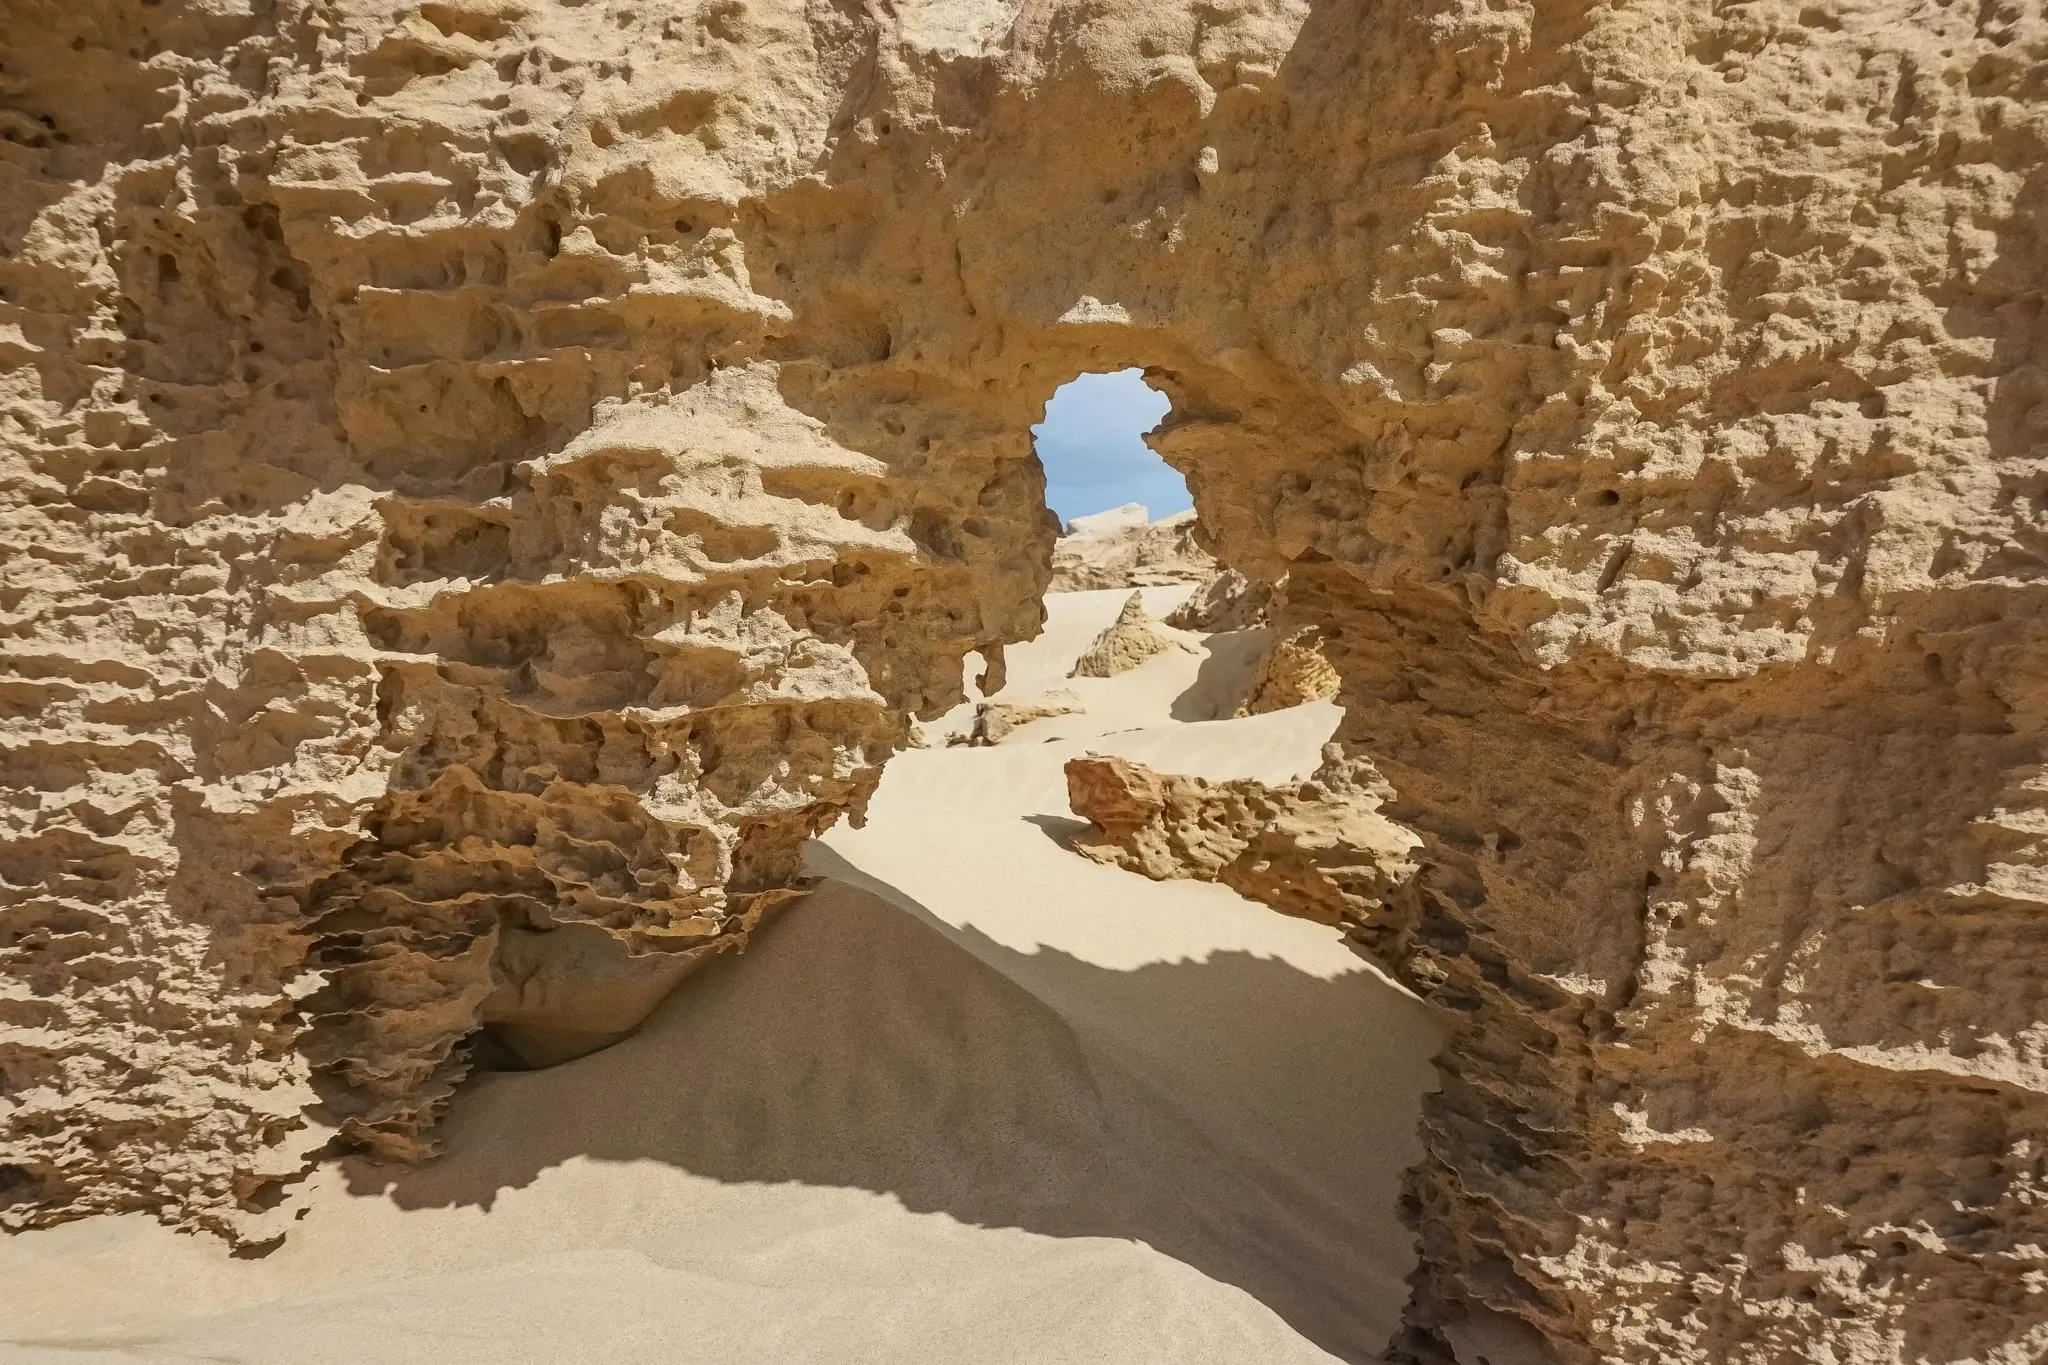 215 photos of Sand Canyons and Dune Formations